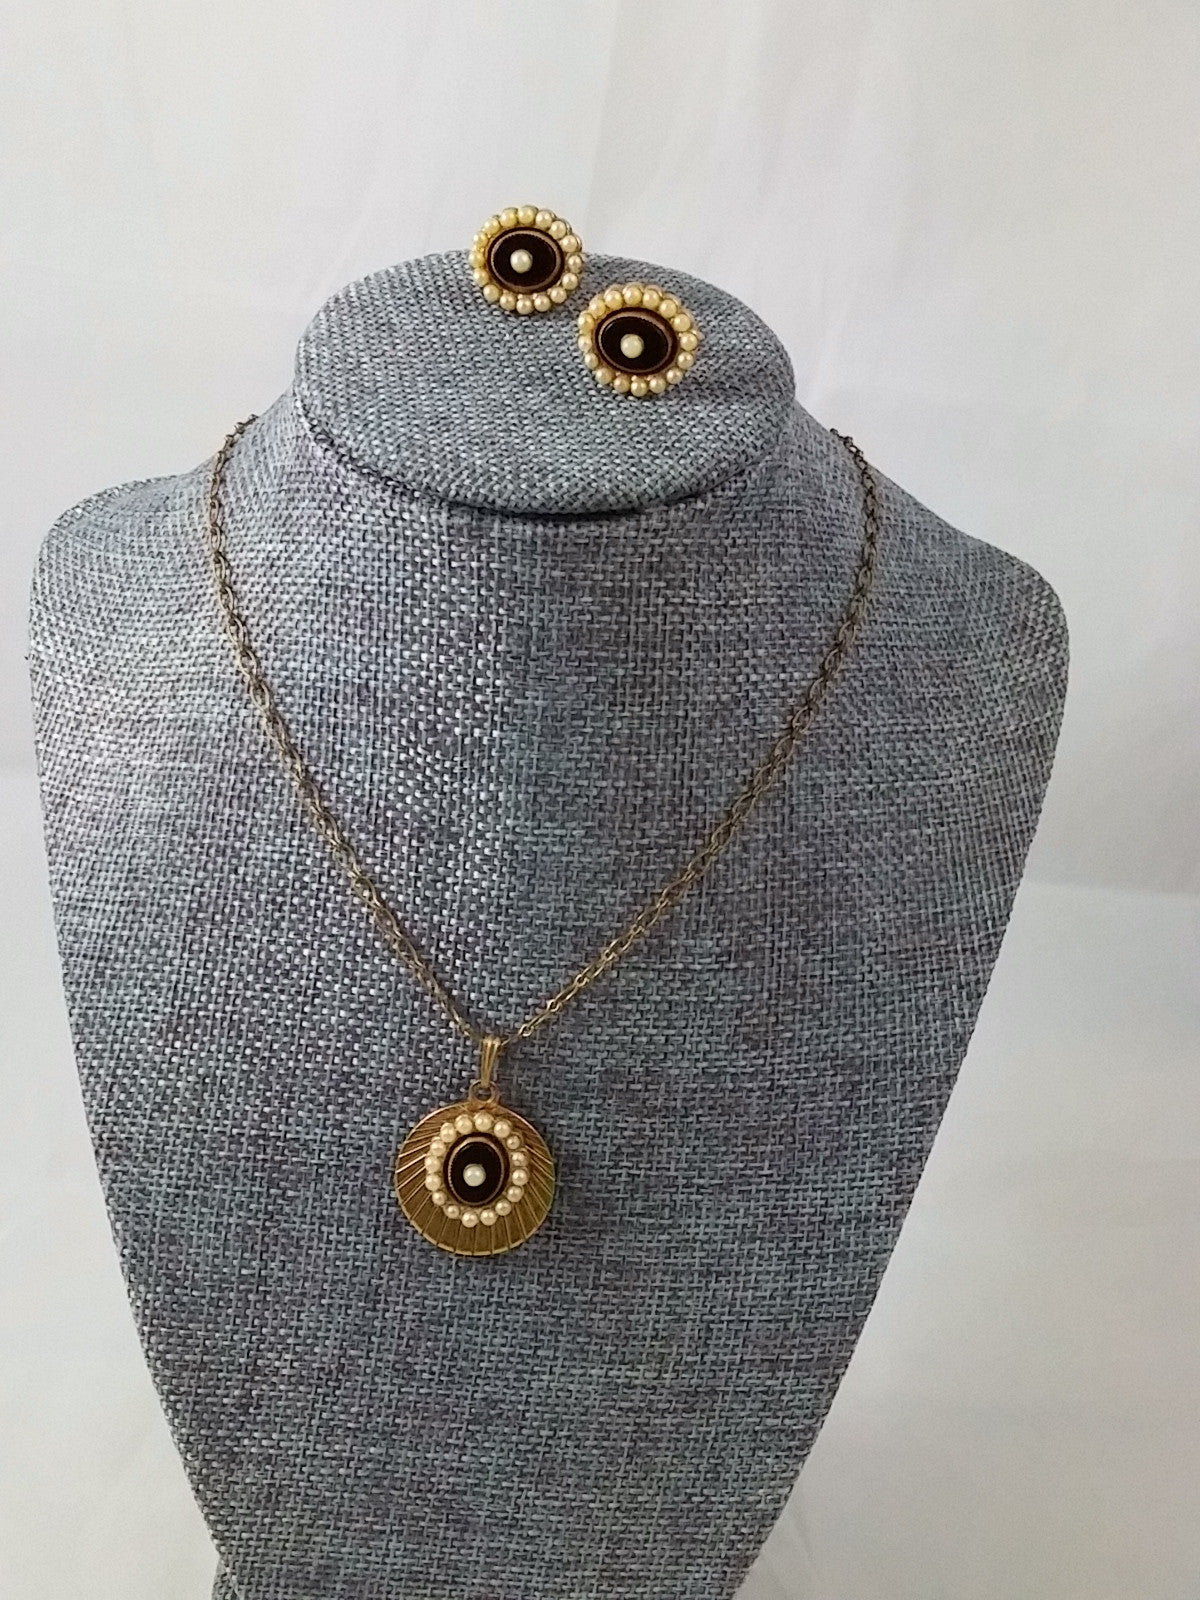 Vintage 50s Necklace & Earring Set Brass Tone w/ Black Onyx and Seed Pearl Center - Dirty 30 Vintage | Vintage Clothing, Vintage Jewelry, Vintage Accessories